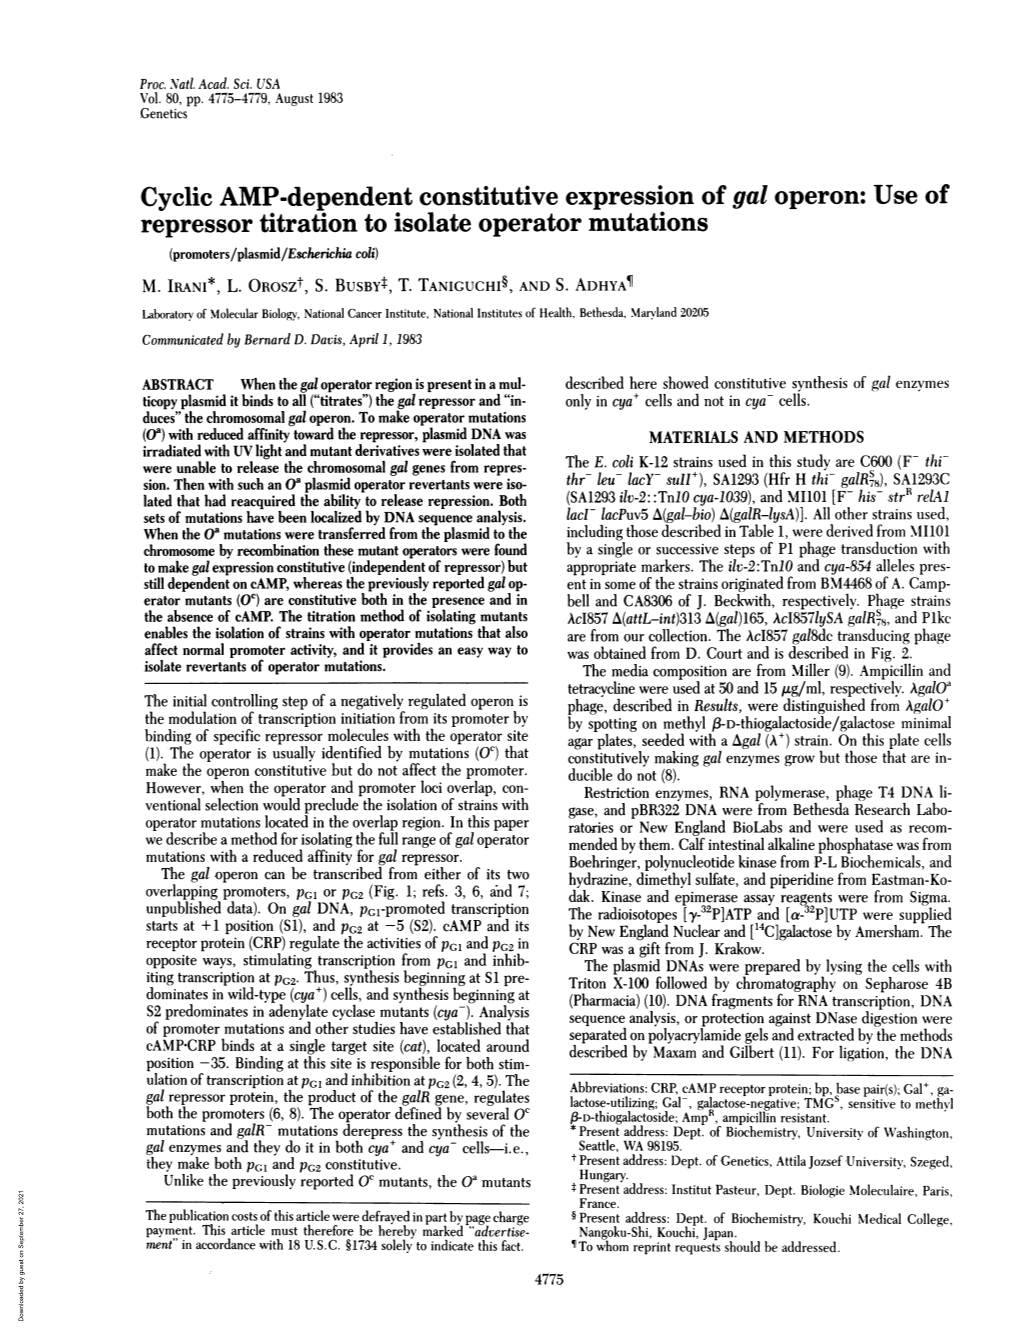 Cyclic AMP-Dependent Constitutive Expression of Gal Operon: Use of Repressor Titration to Isolate Operator Mutations (Promoters/Plasmid/Escheriehia Coli) M